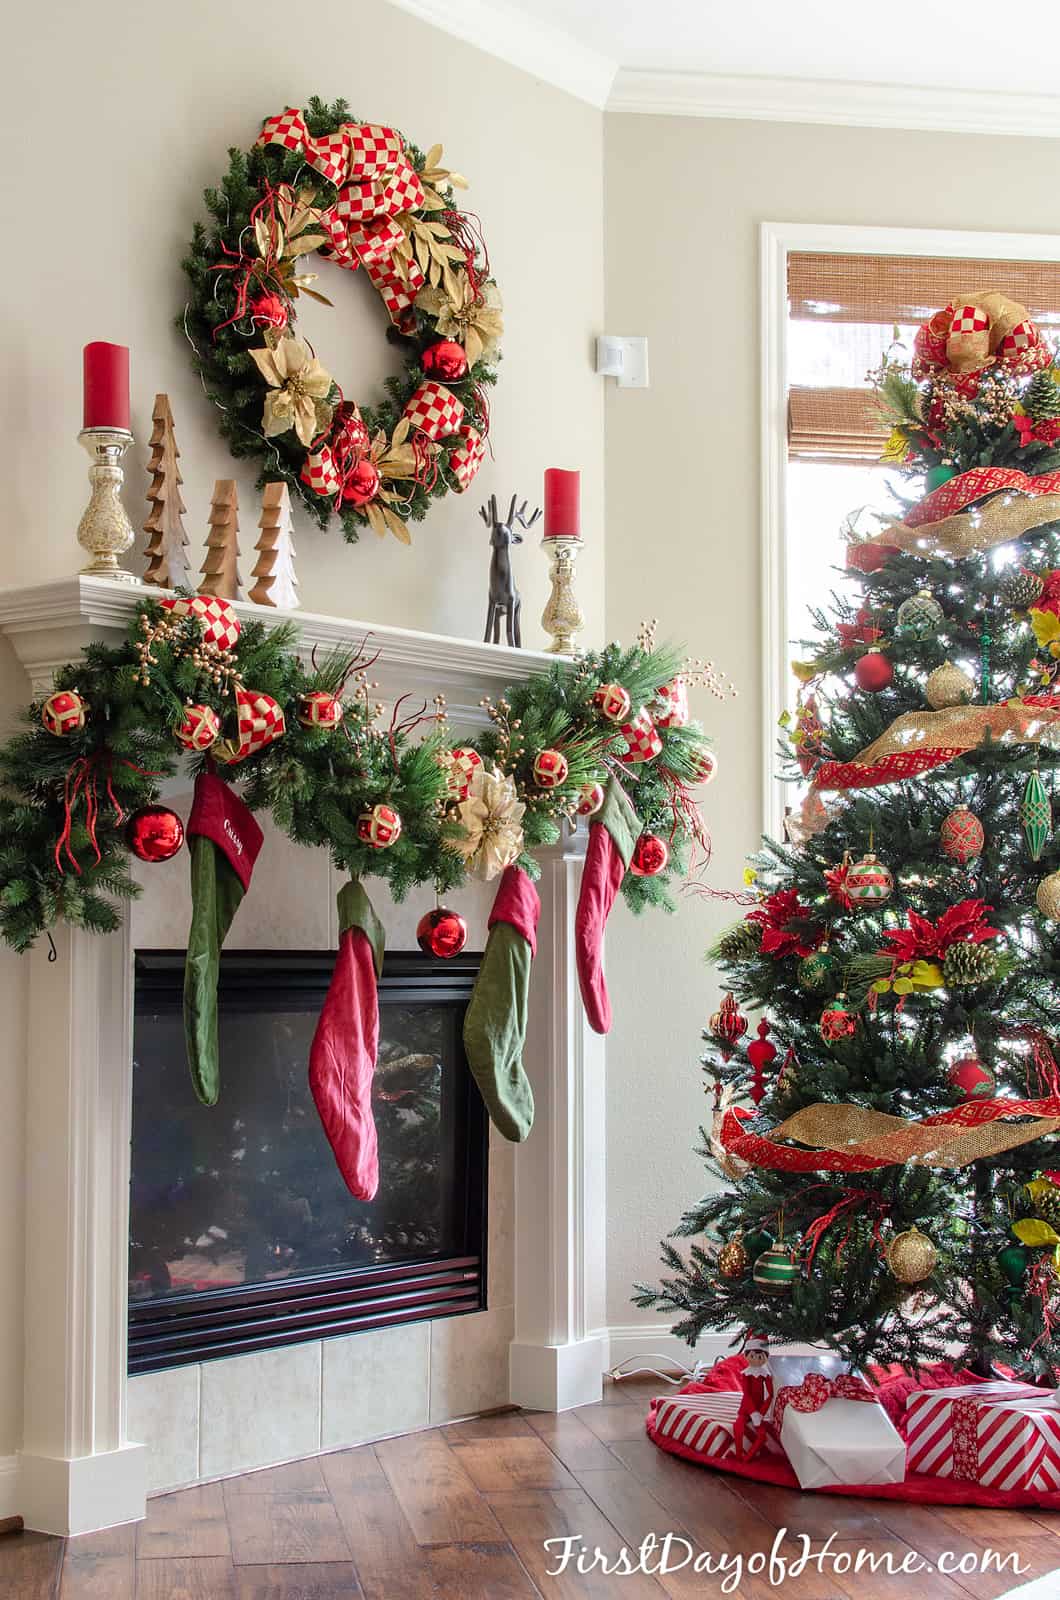 Christmas wreath and mantel by Christmas tree, decorated with red and gold